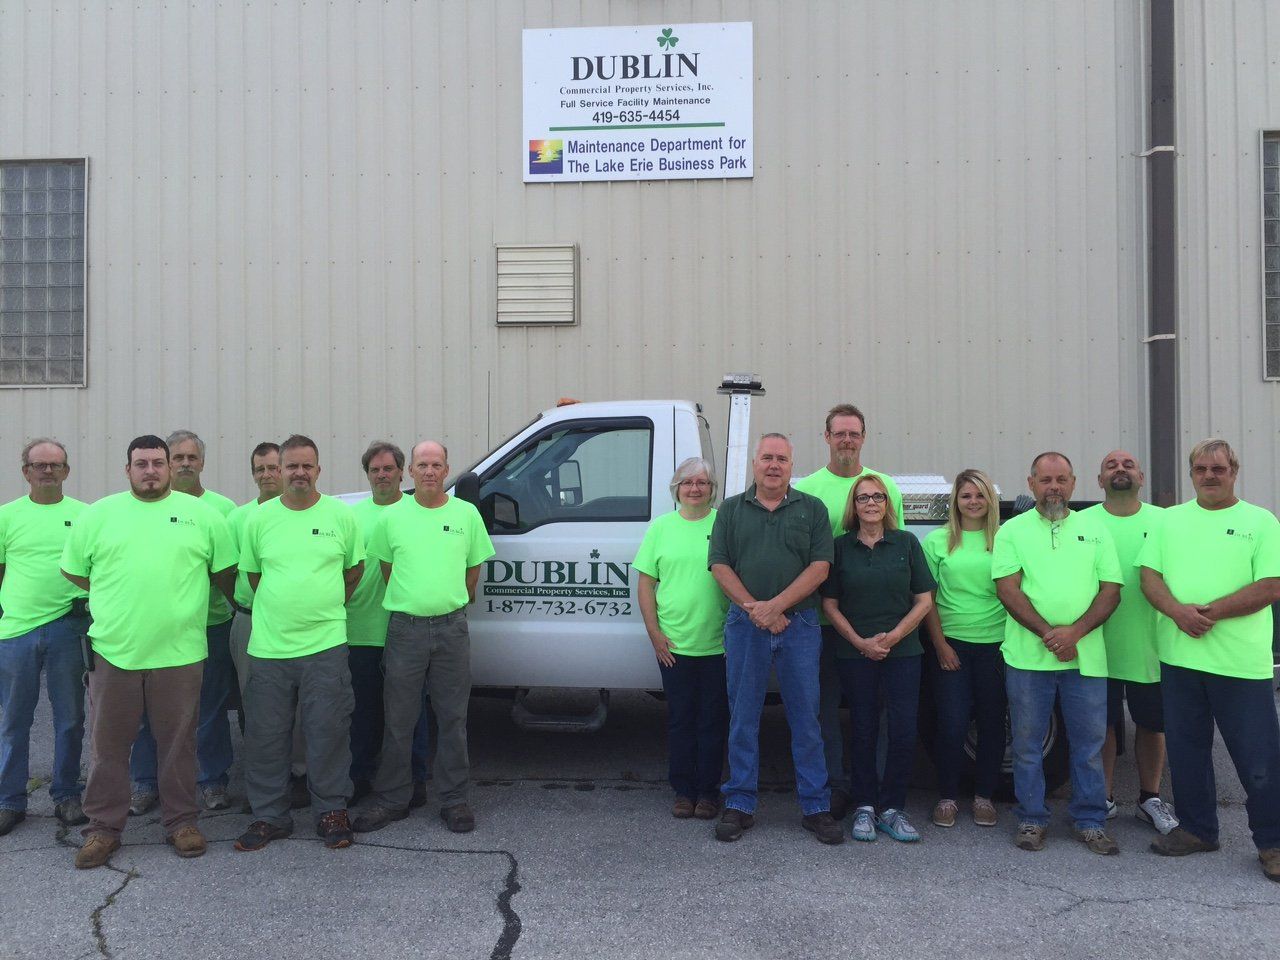 Team at Dublin Commercial Property Services, Inc.